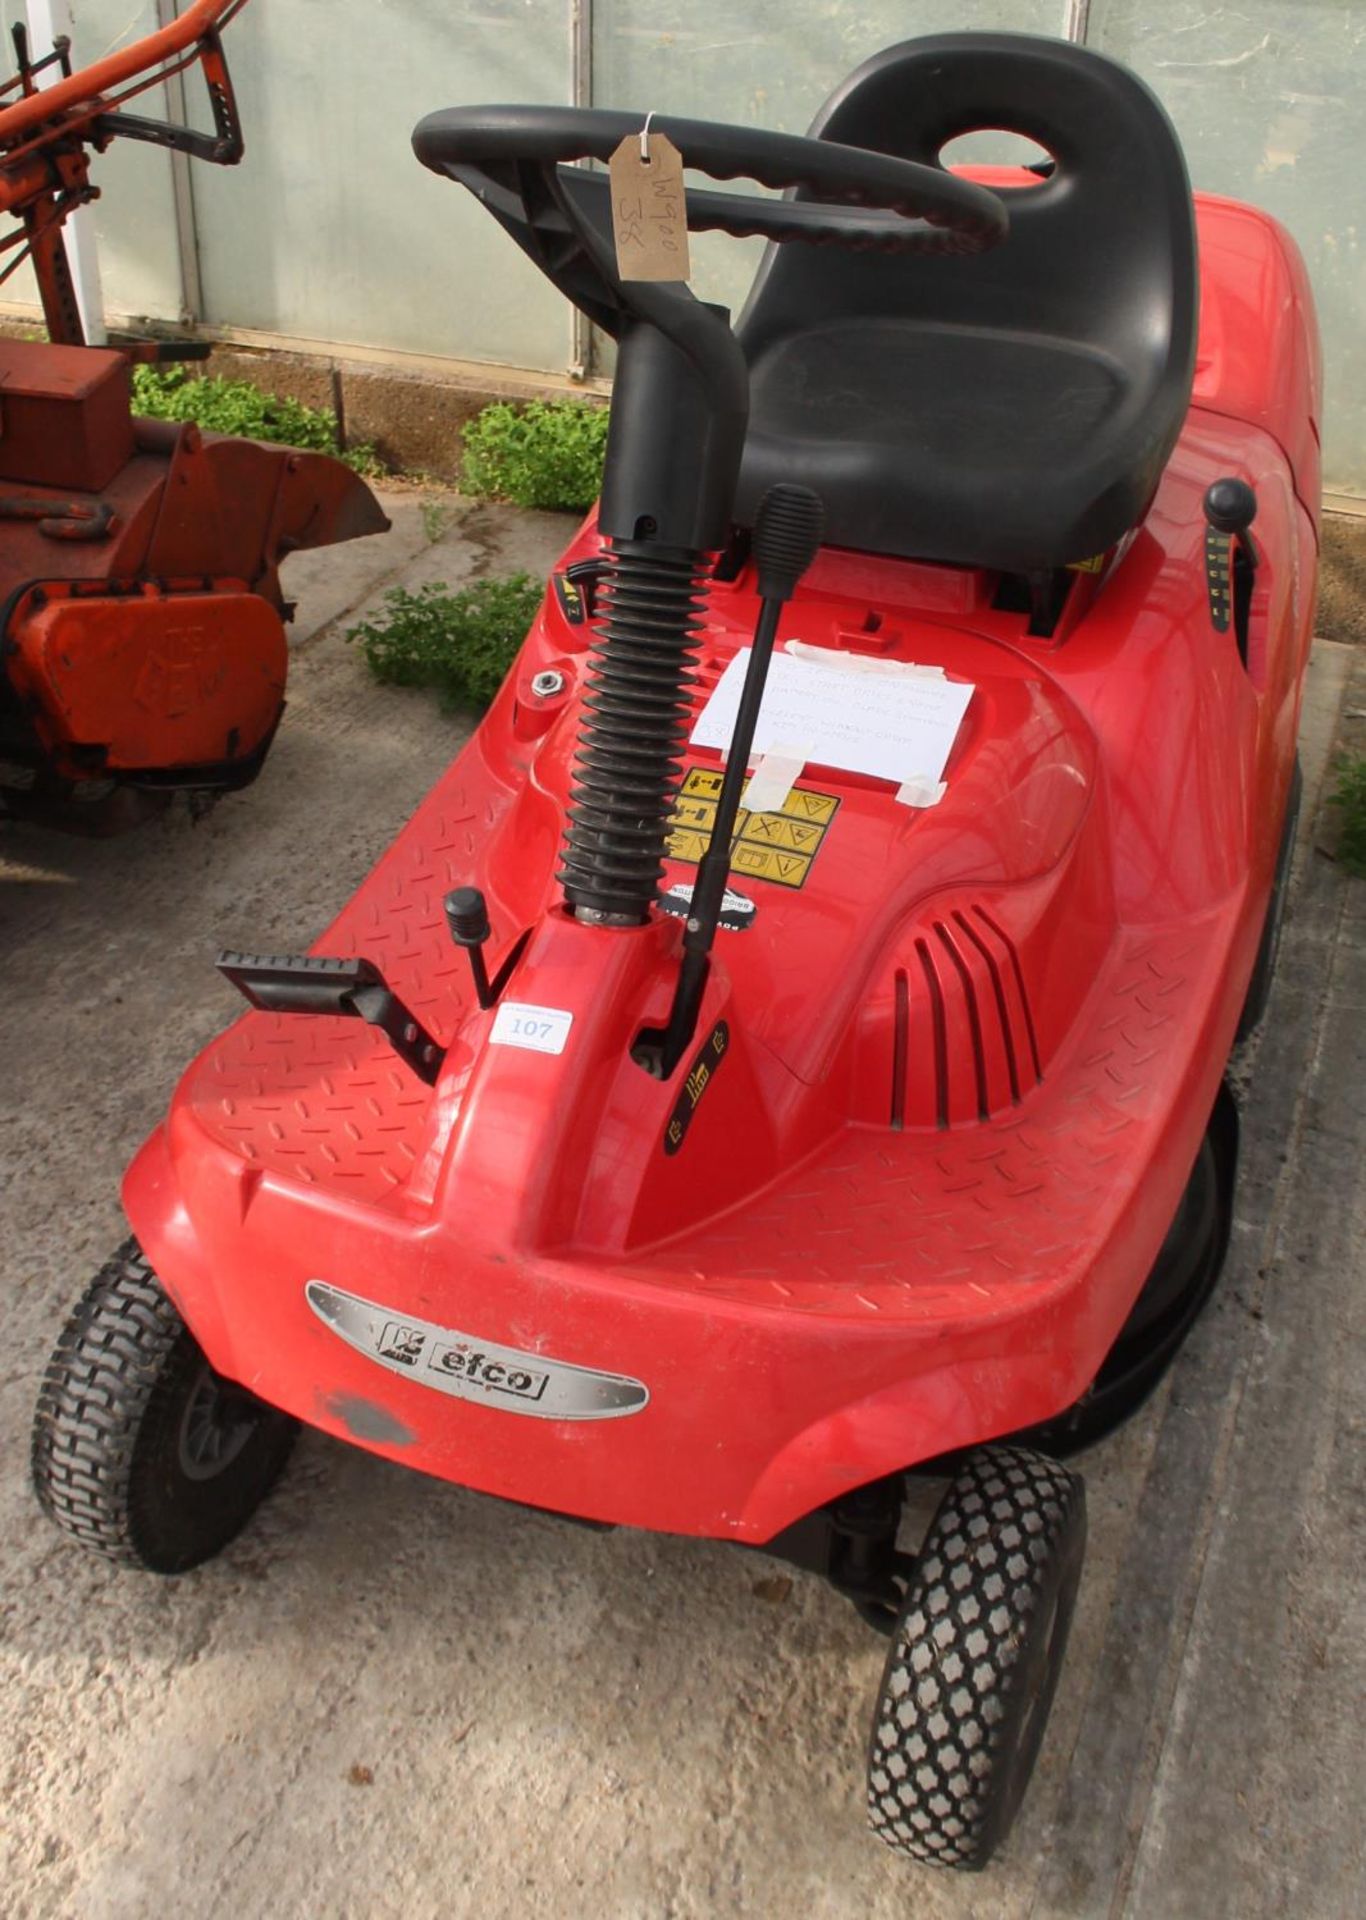 AN EFKO RIDE ON LAWN MOWER 26 INCH CUT WITH ELECTRIC START AND NEW BATTERY - BELIEVED IN WORKING